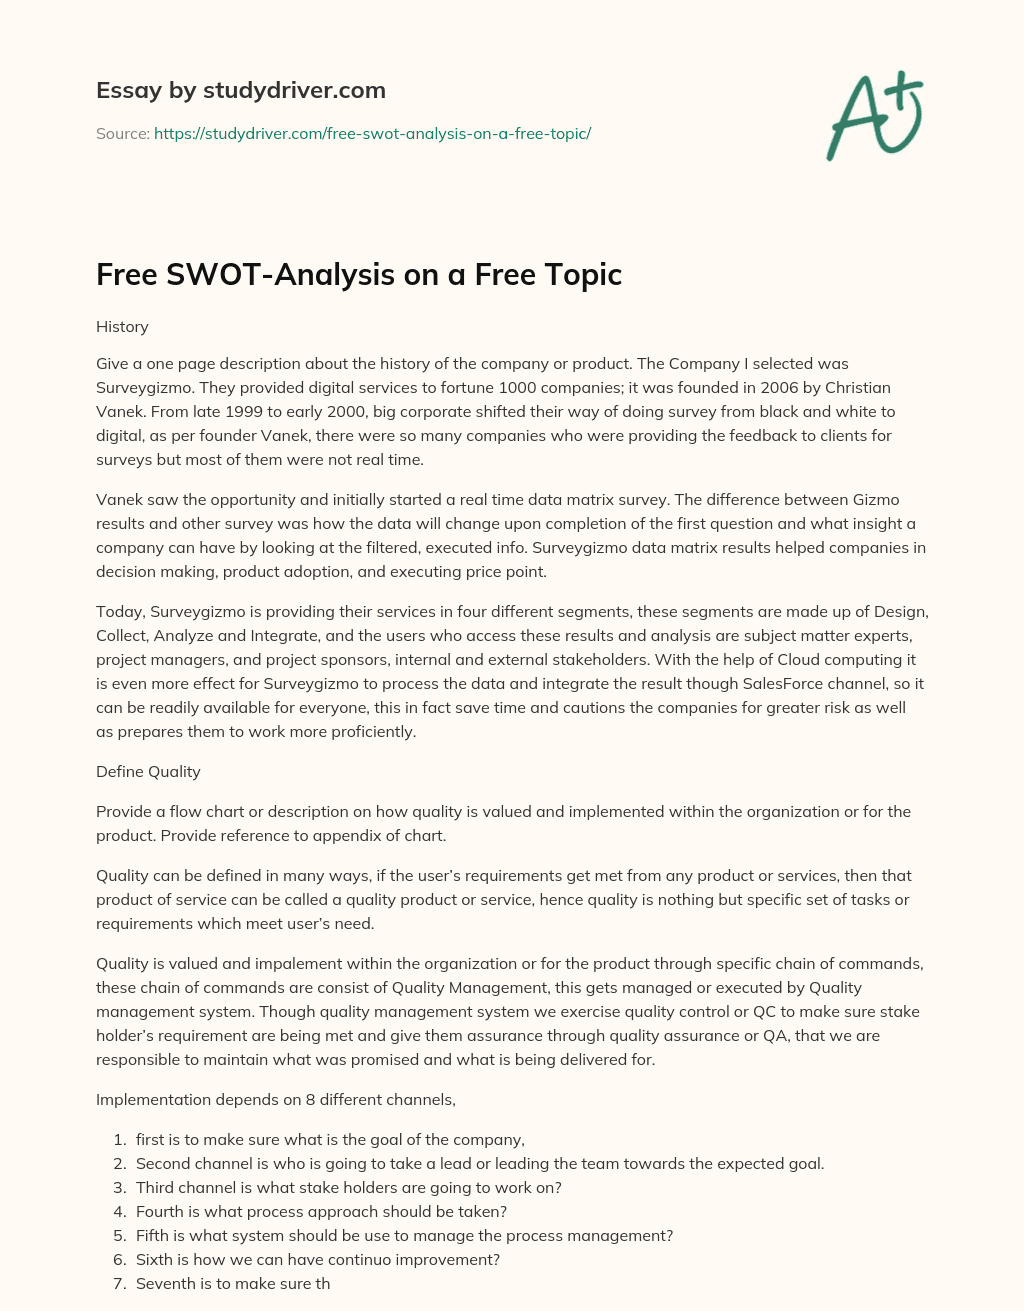 Free SWOT-Analysis on a Free Topic essay